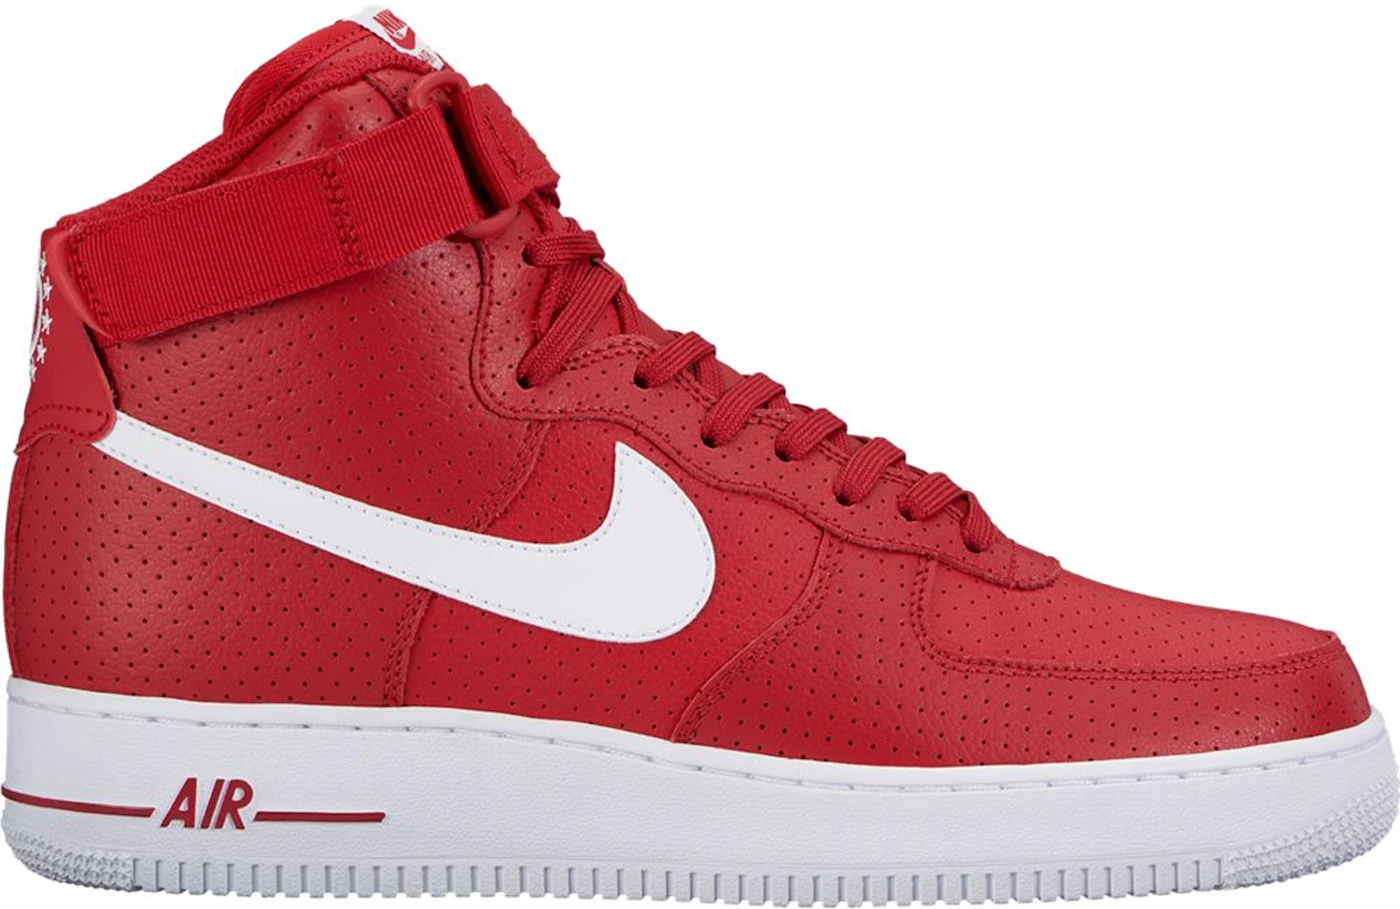 Air Force 1 High w Strap Red/Gum Bottom Mens NEW HOT SALE